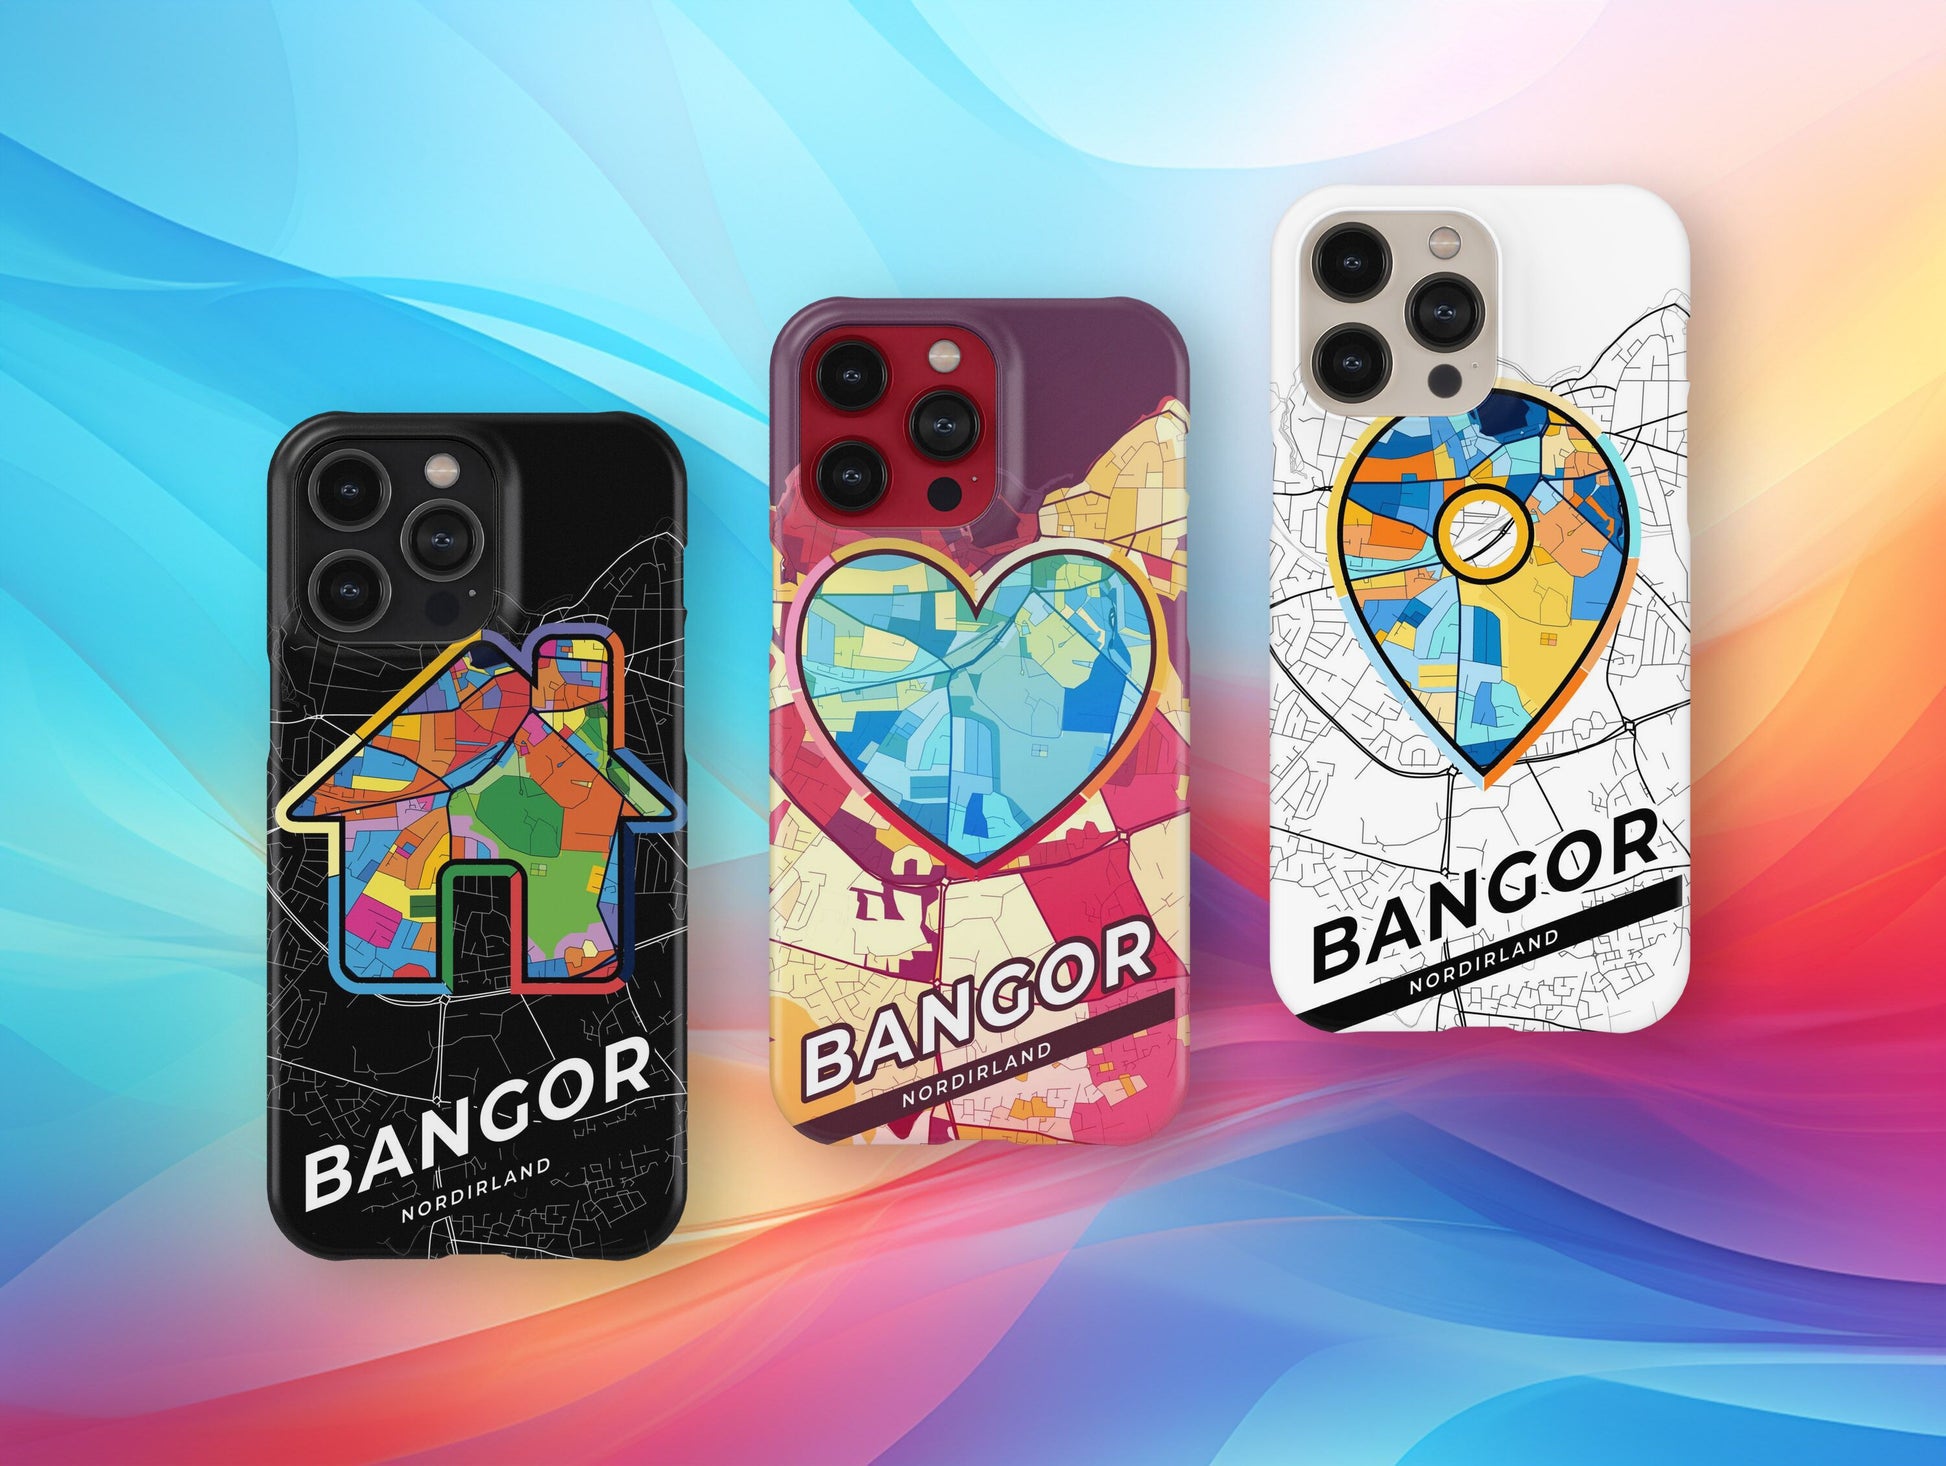 Bangor Northern Ireland slim phone case with colorful icon. Birthday, wedding or housewarming gift. Couple match cases.